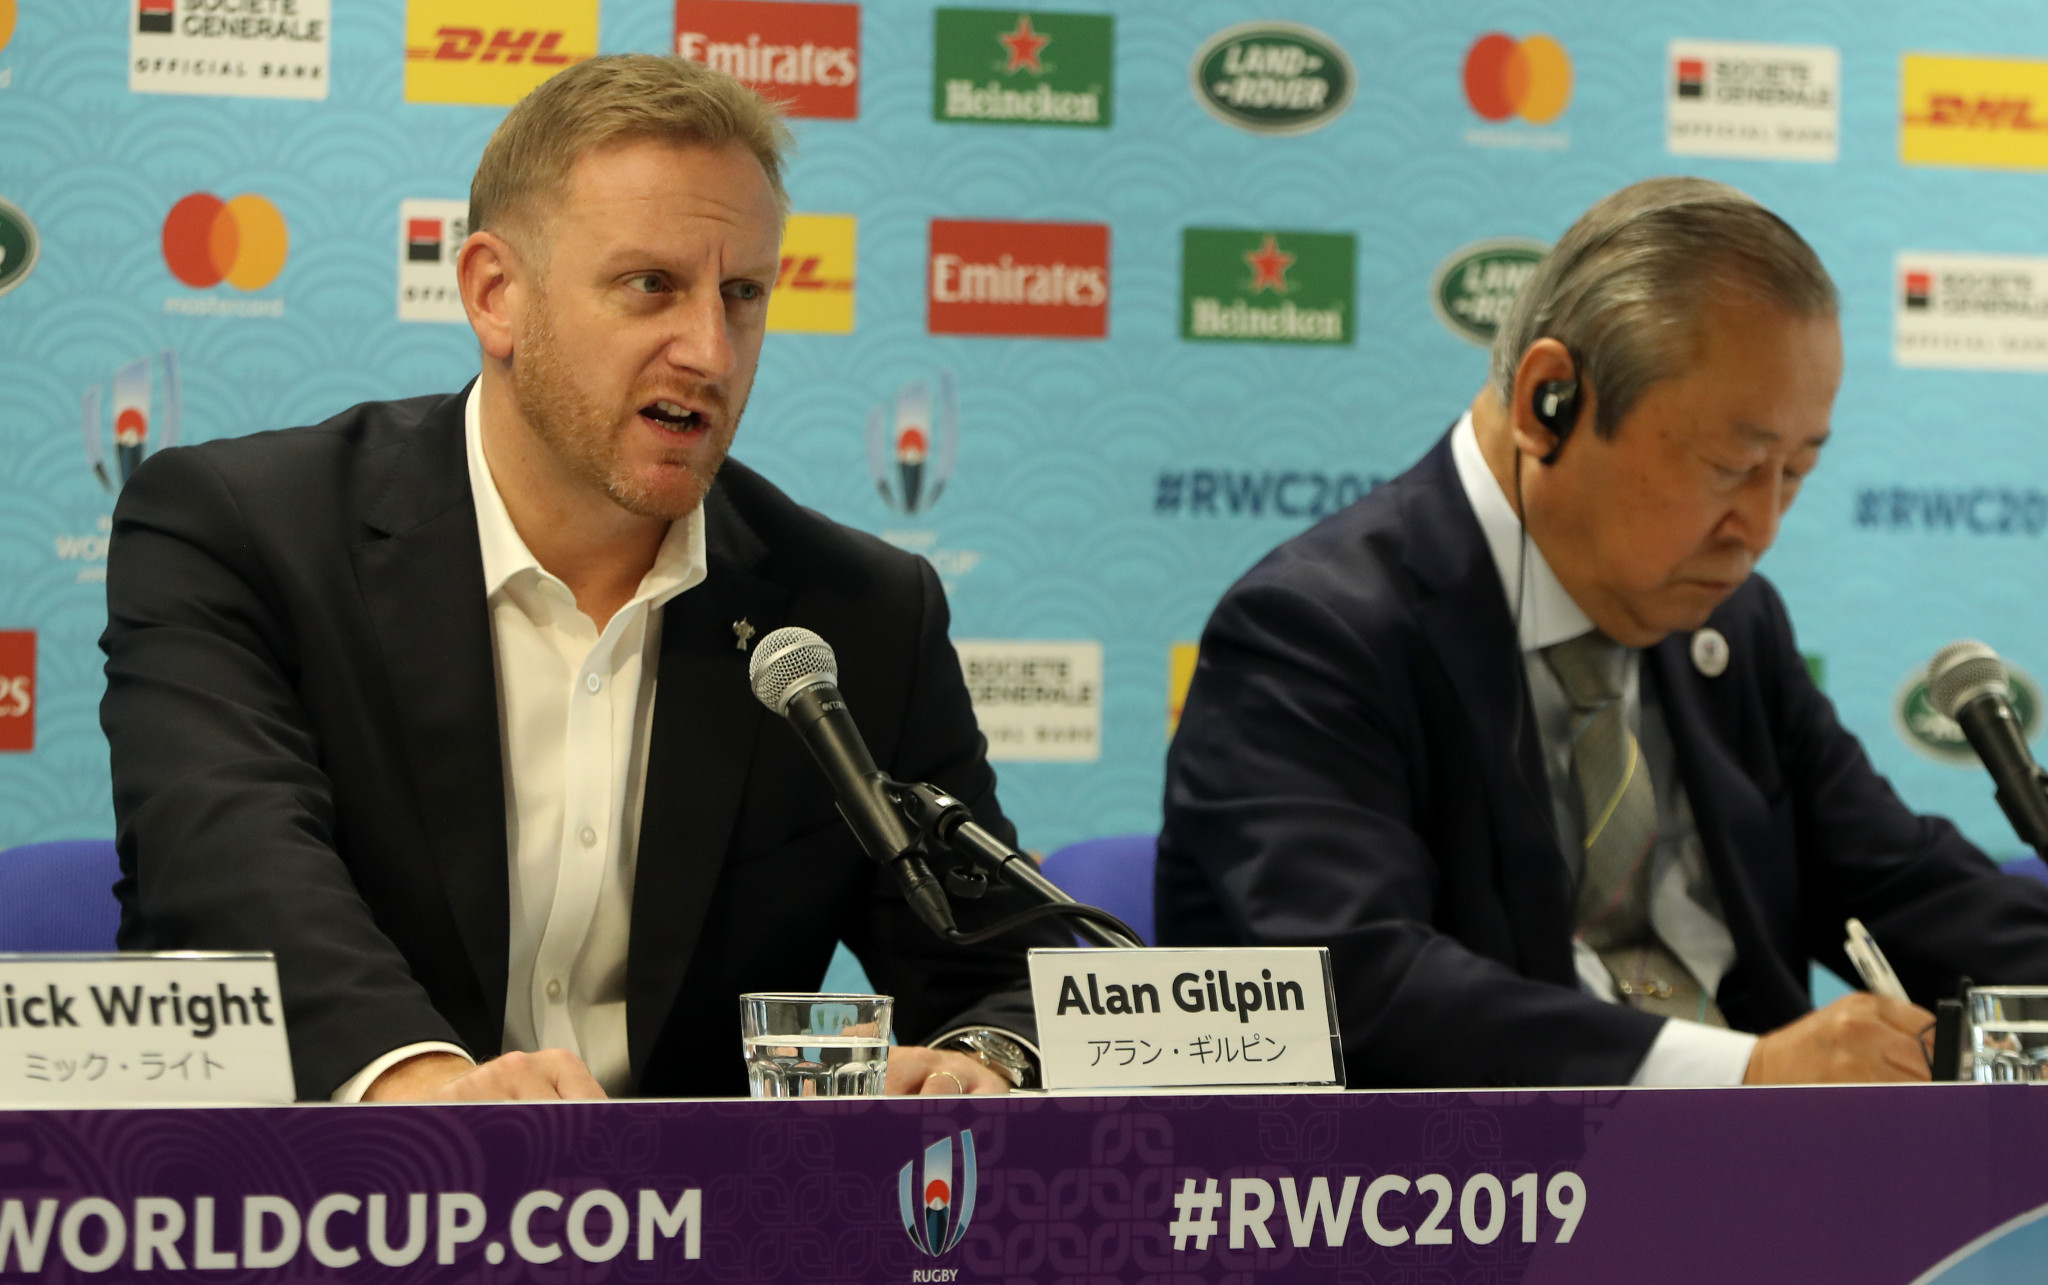 Rugby World Cup tournament director Alan Gilpin announced the match cancellations at a press conference in Tokyo ©Getty Images